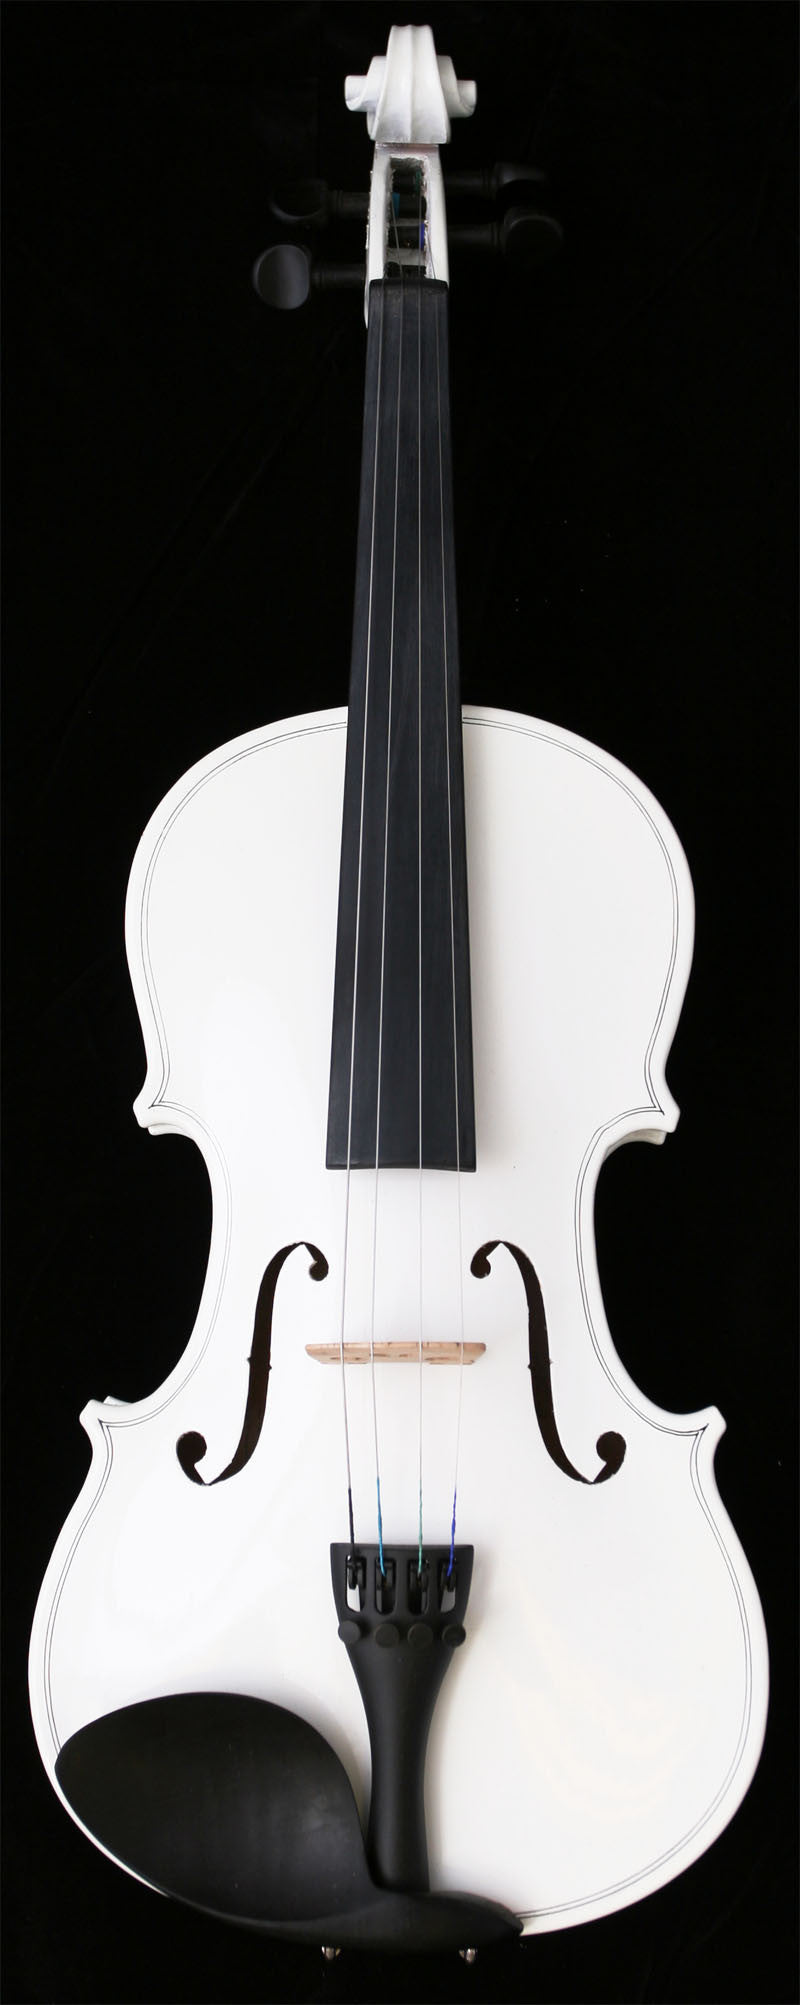 Crescent Direct Vl-wt 4/4 White Maplewood Acoustic Violin With Case, Rosin, And Bow